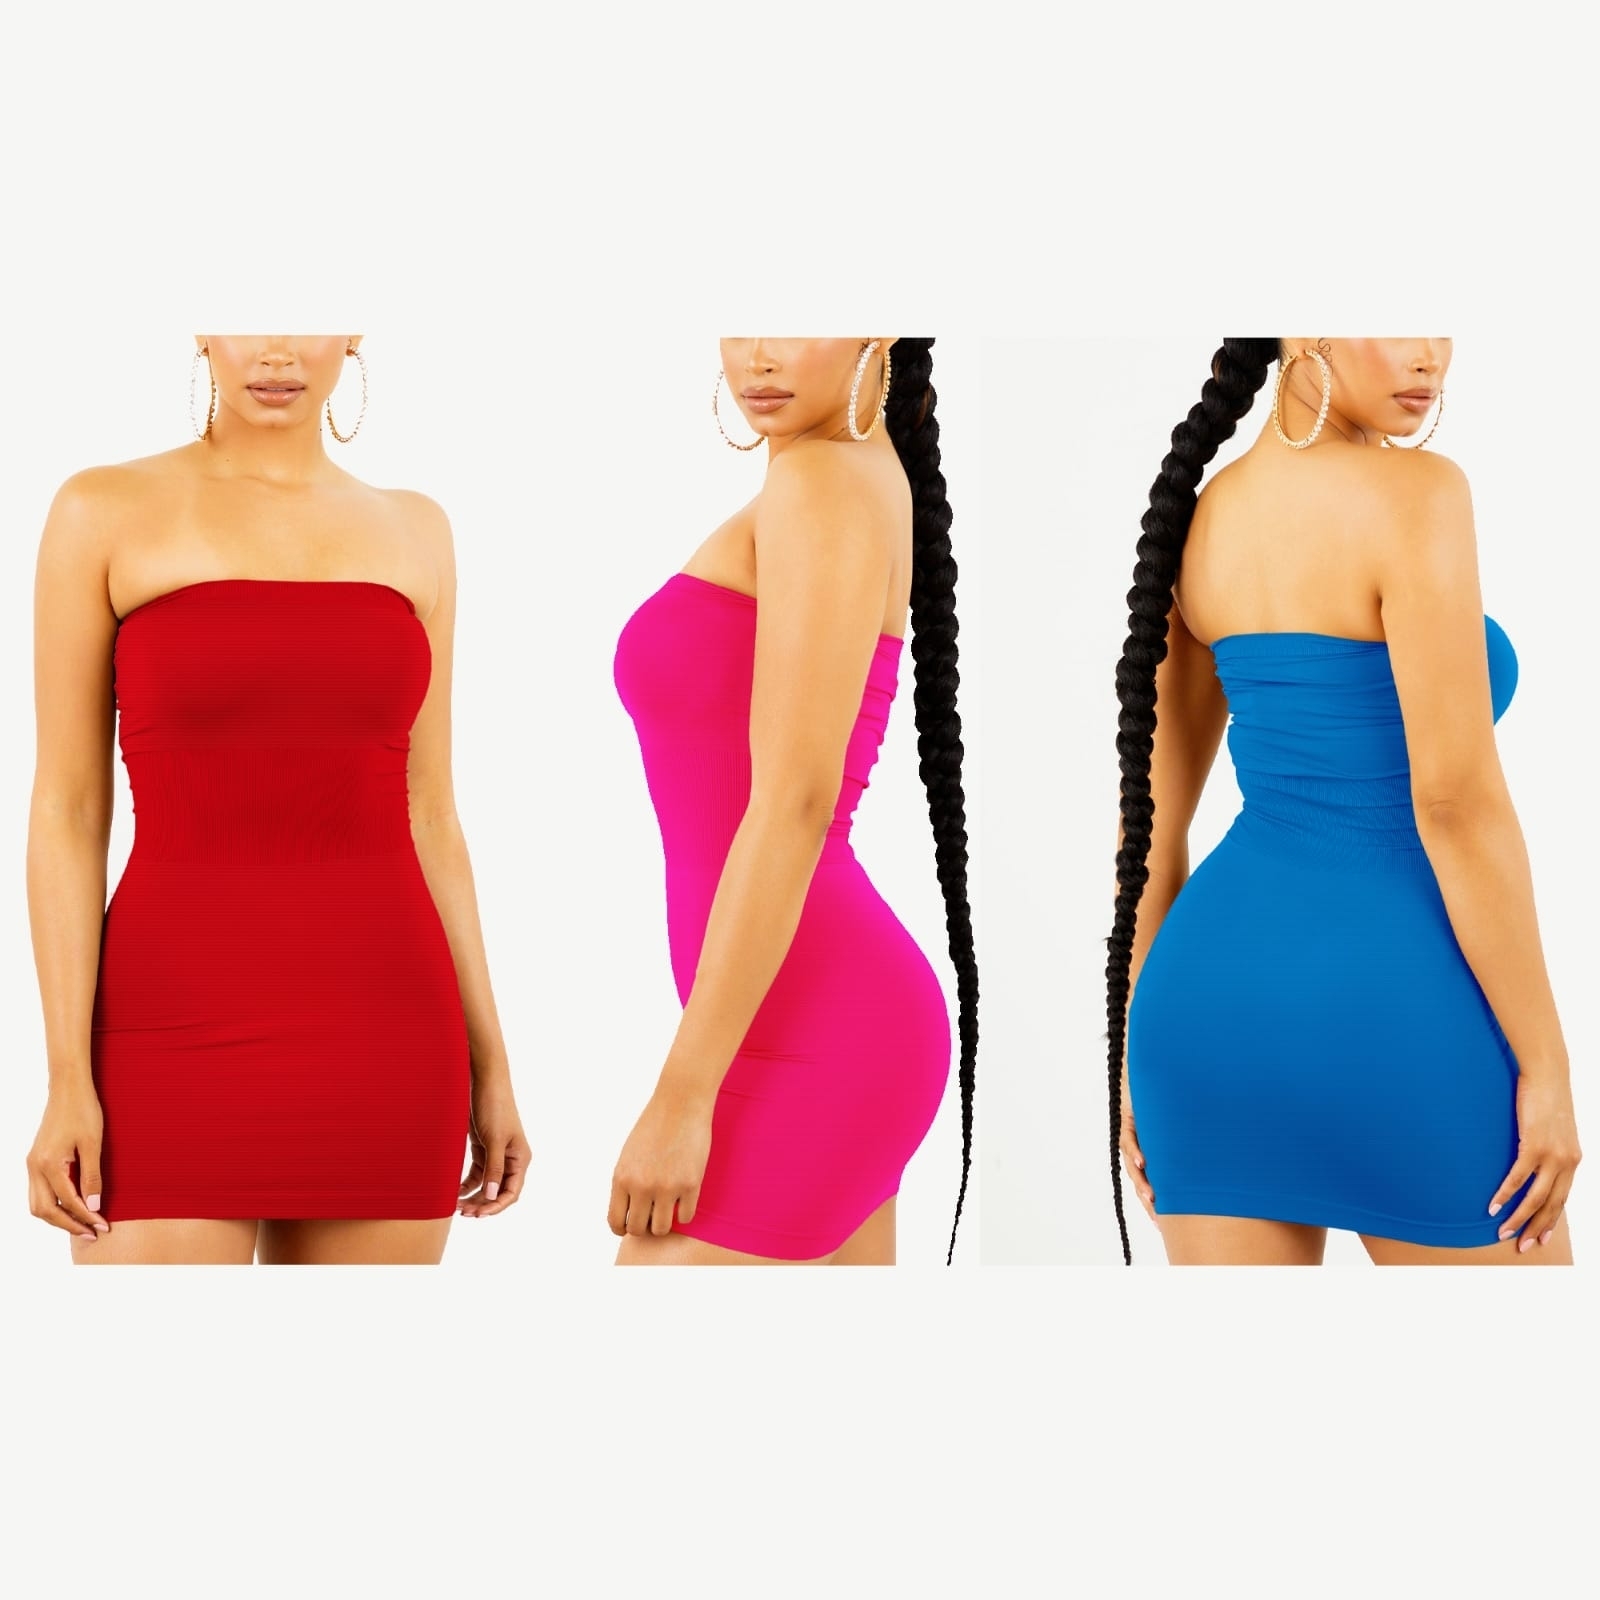 3-Pack Women's Strapless Stretchy Seamless Tight Fit Body Con Mini Tube Top Dress - RED, L